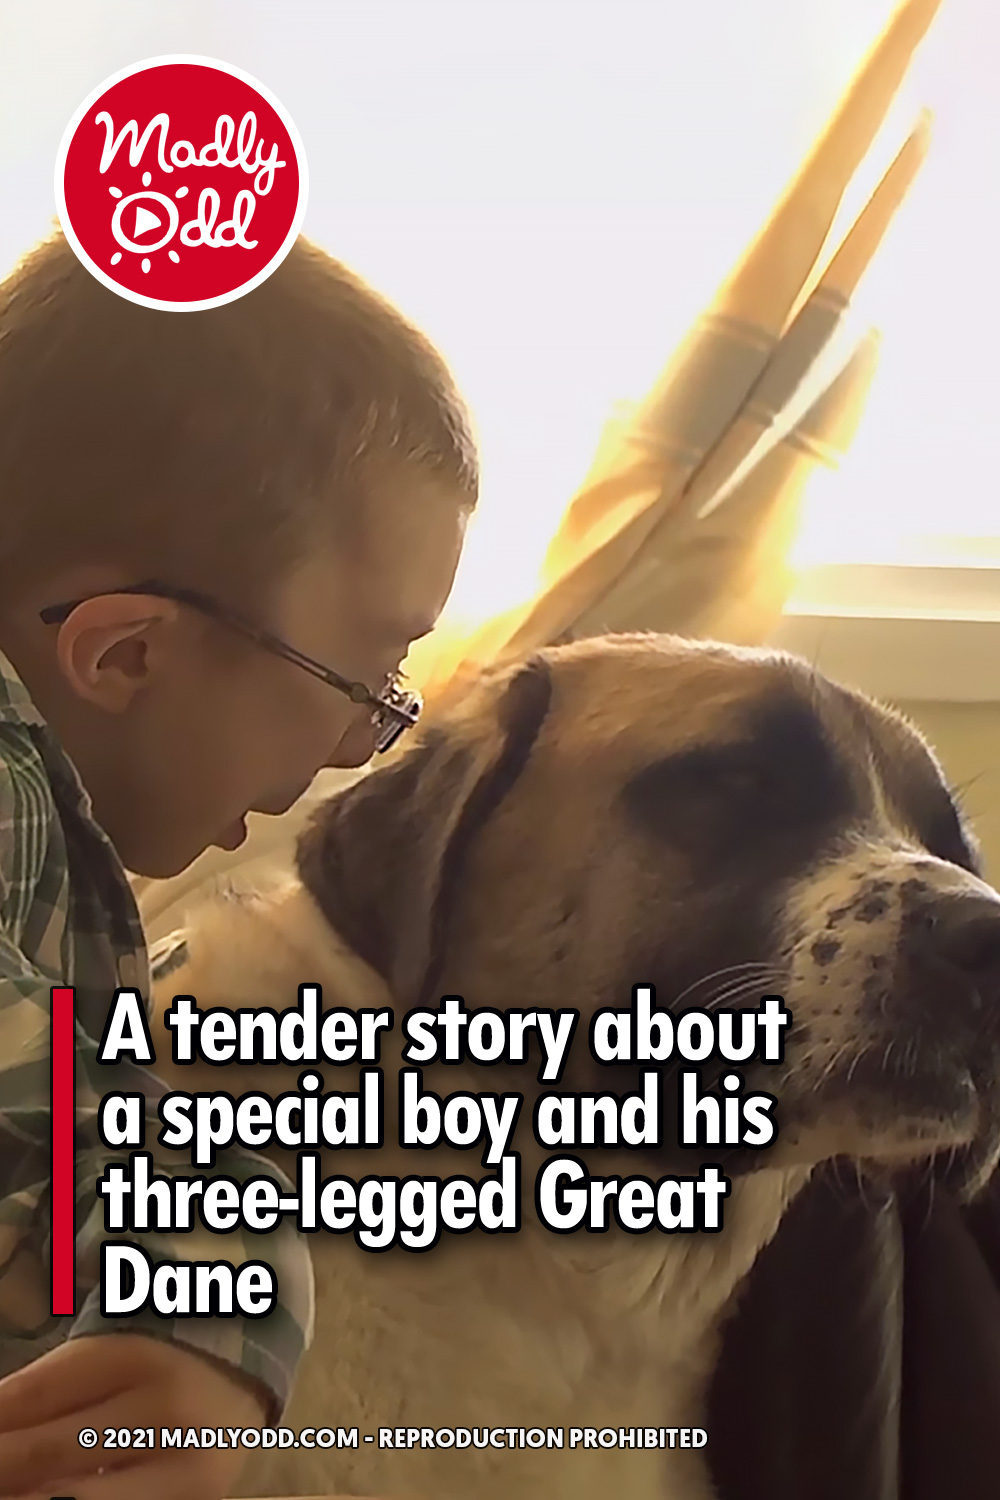 A tender story about a special boy and his three-legged Great Dane